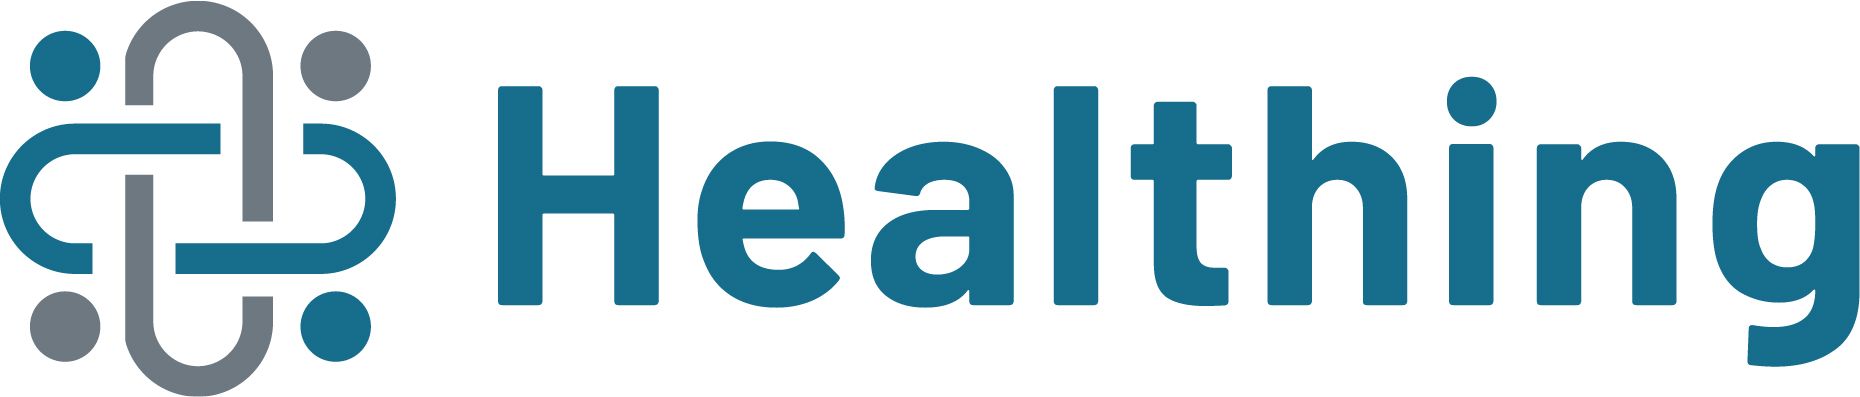  a research-based pharmaceutical company. logo